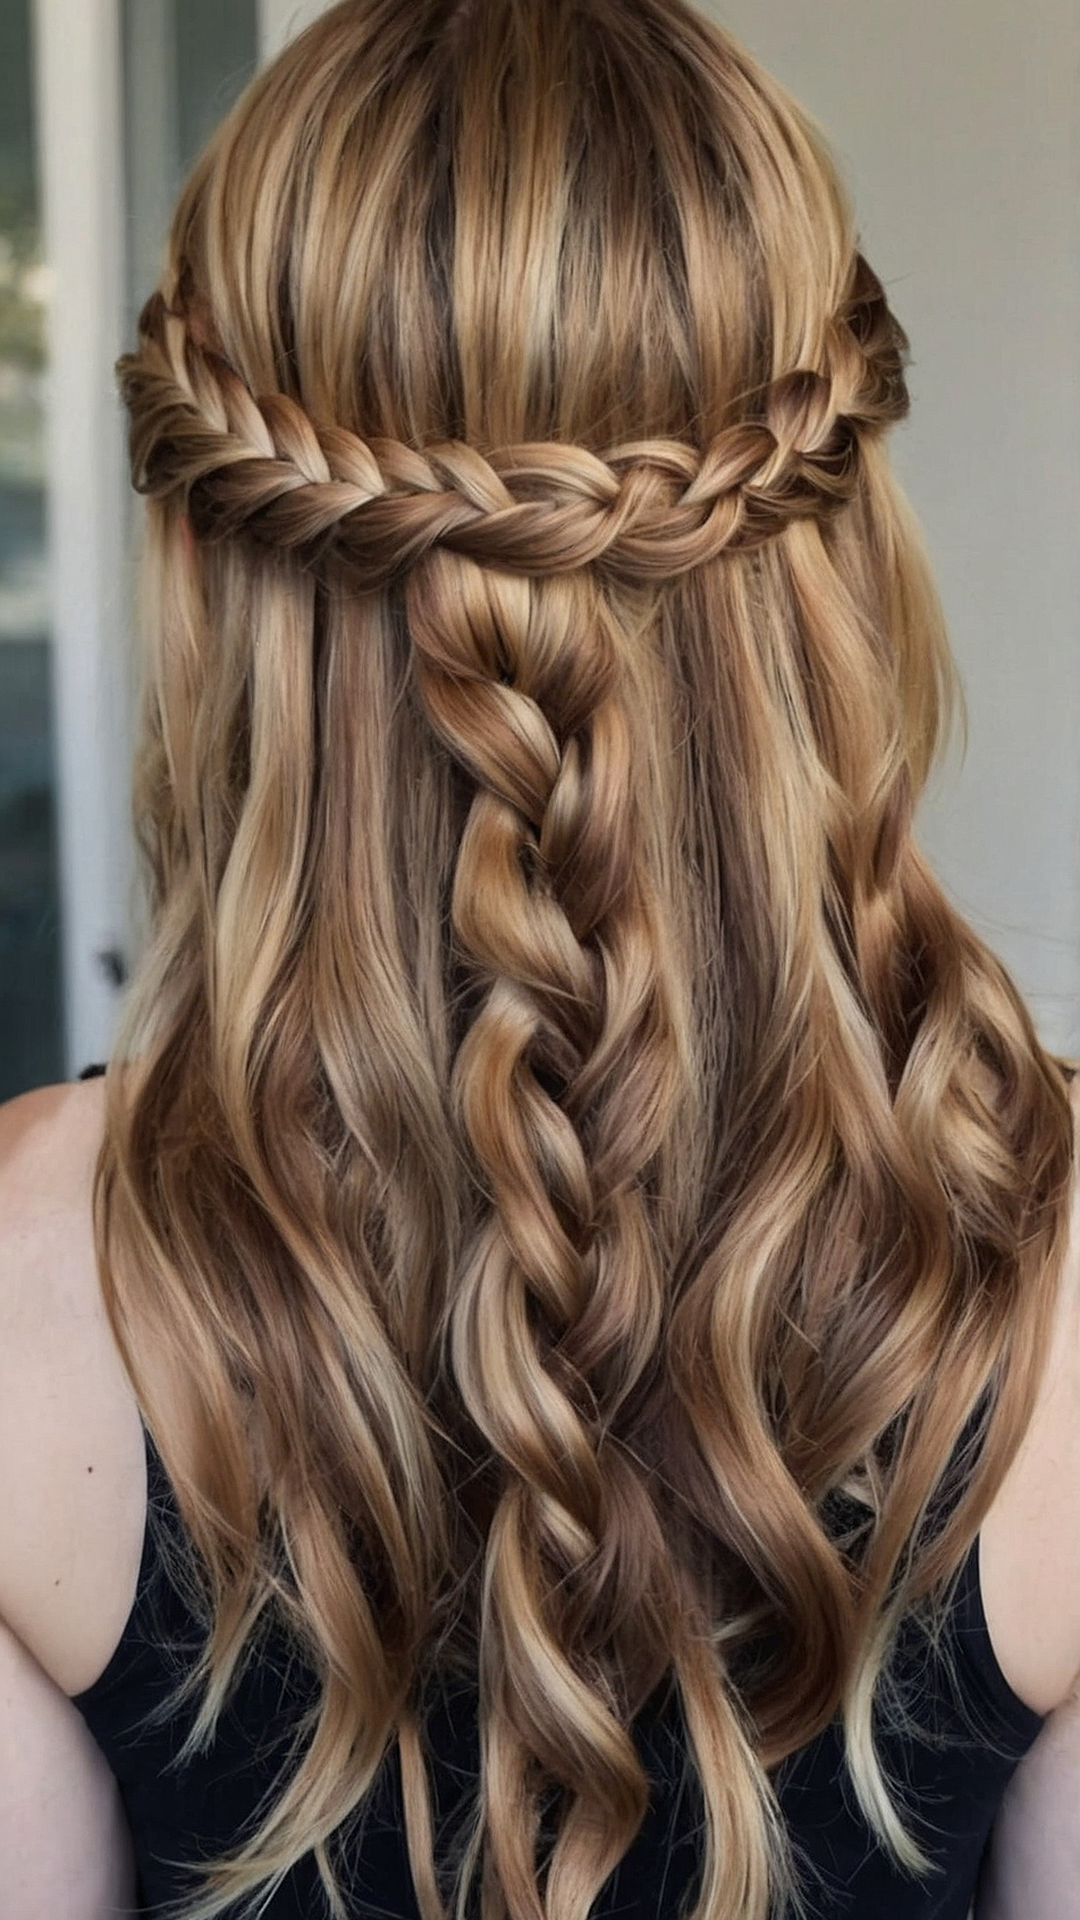 Braided Masterpieces: Ideas for a Stylish Look